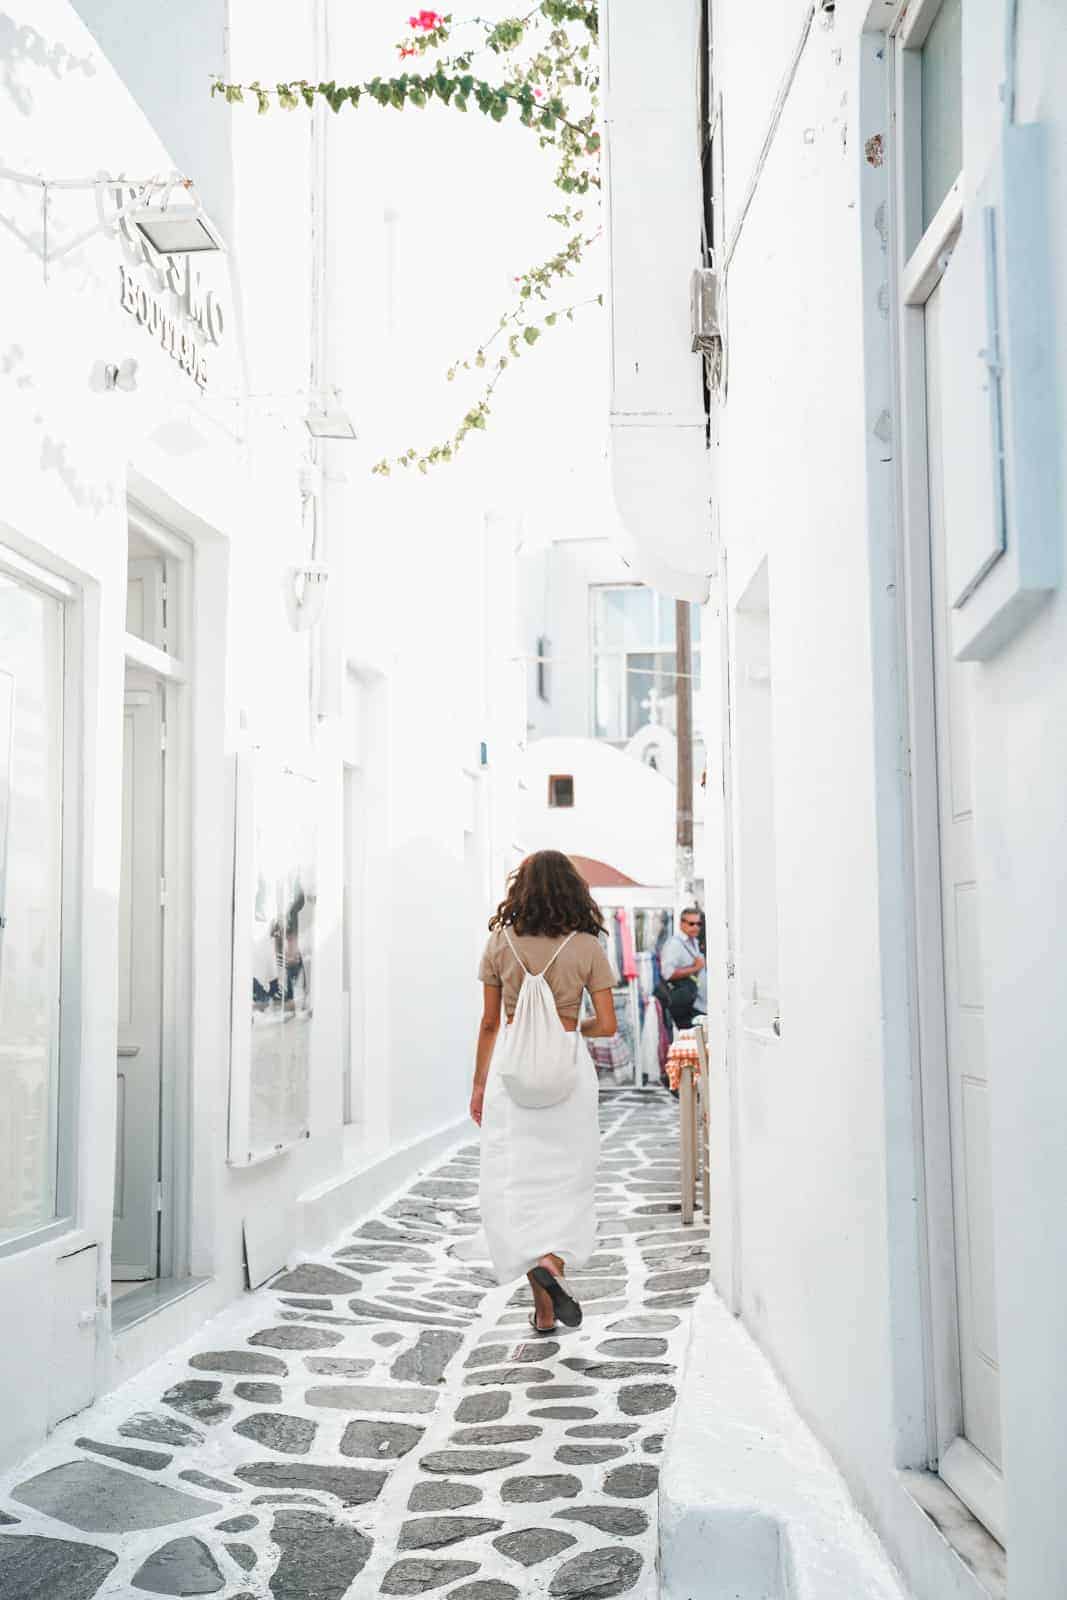 Maria of FoodByMaria walking the streets of Mykonos with a backpack on, one of her international travel tips.